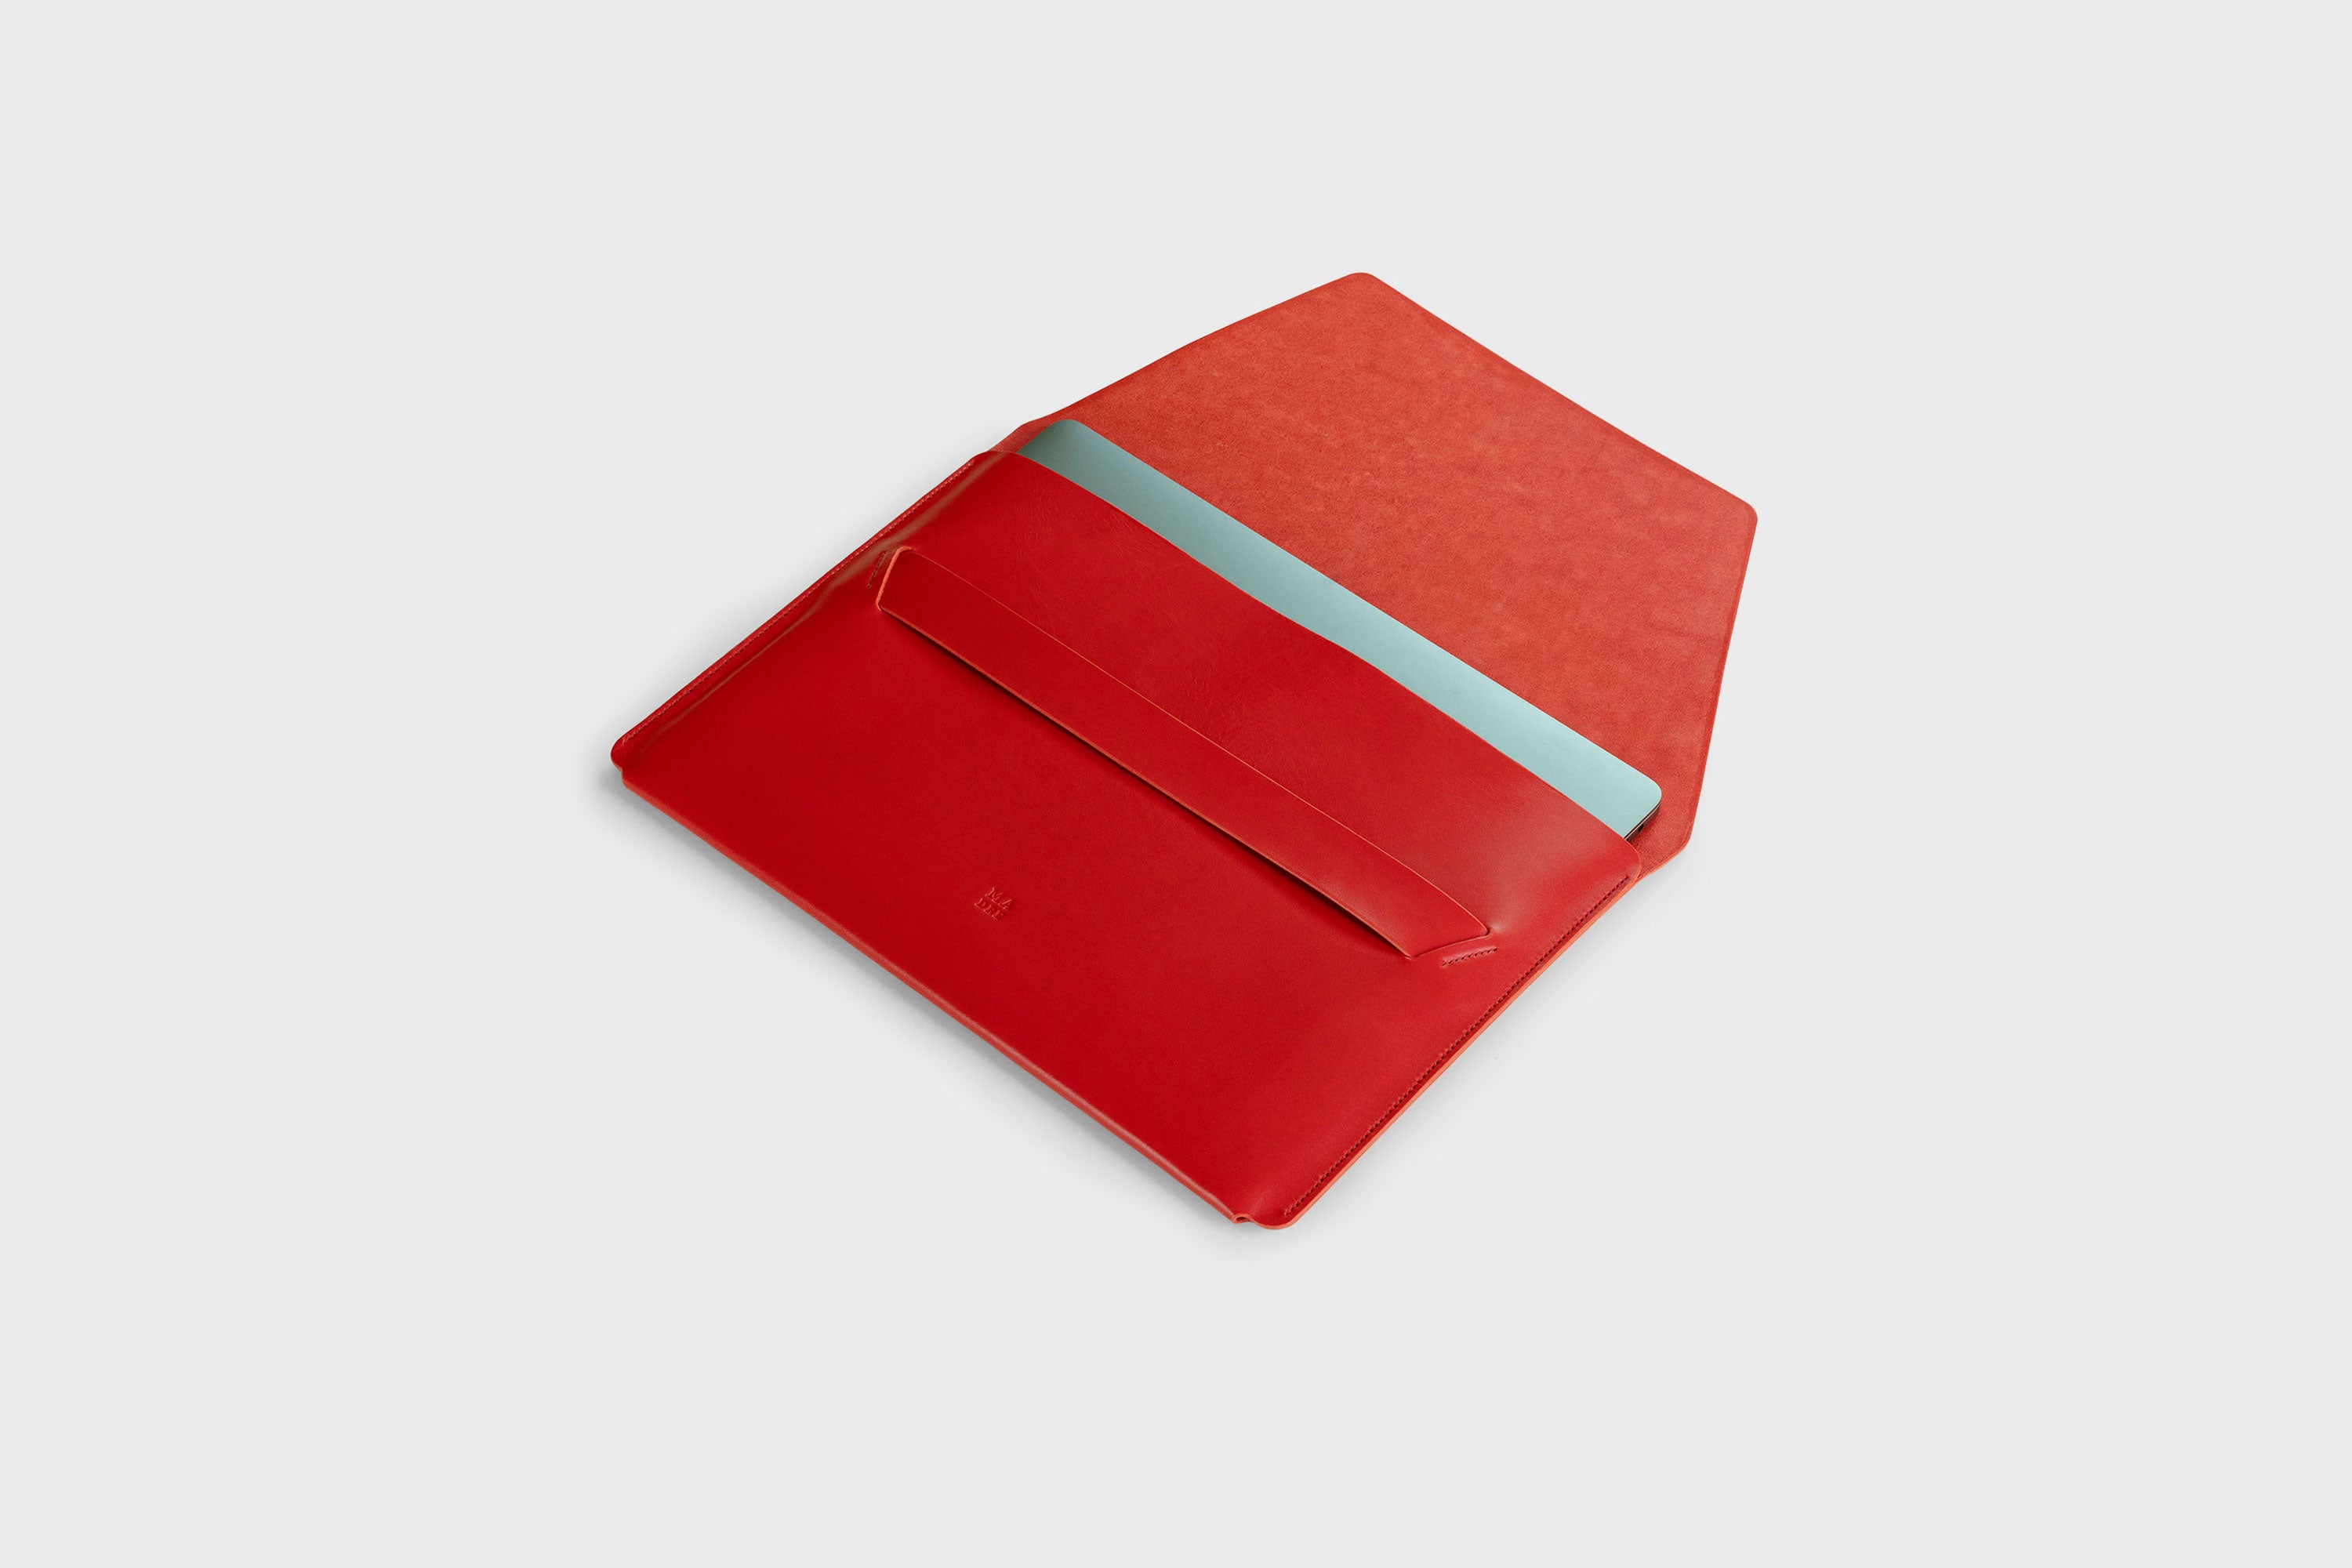 MacBook Pro 14 Inch Leather Sleeve Red Case Real Sustainable Leather Premium Quality Handmade Minimalistic Designer Manuel Dreesmann Atelier Madre Barcelona Spain